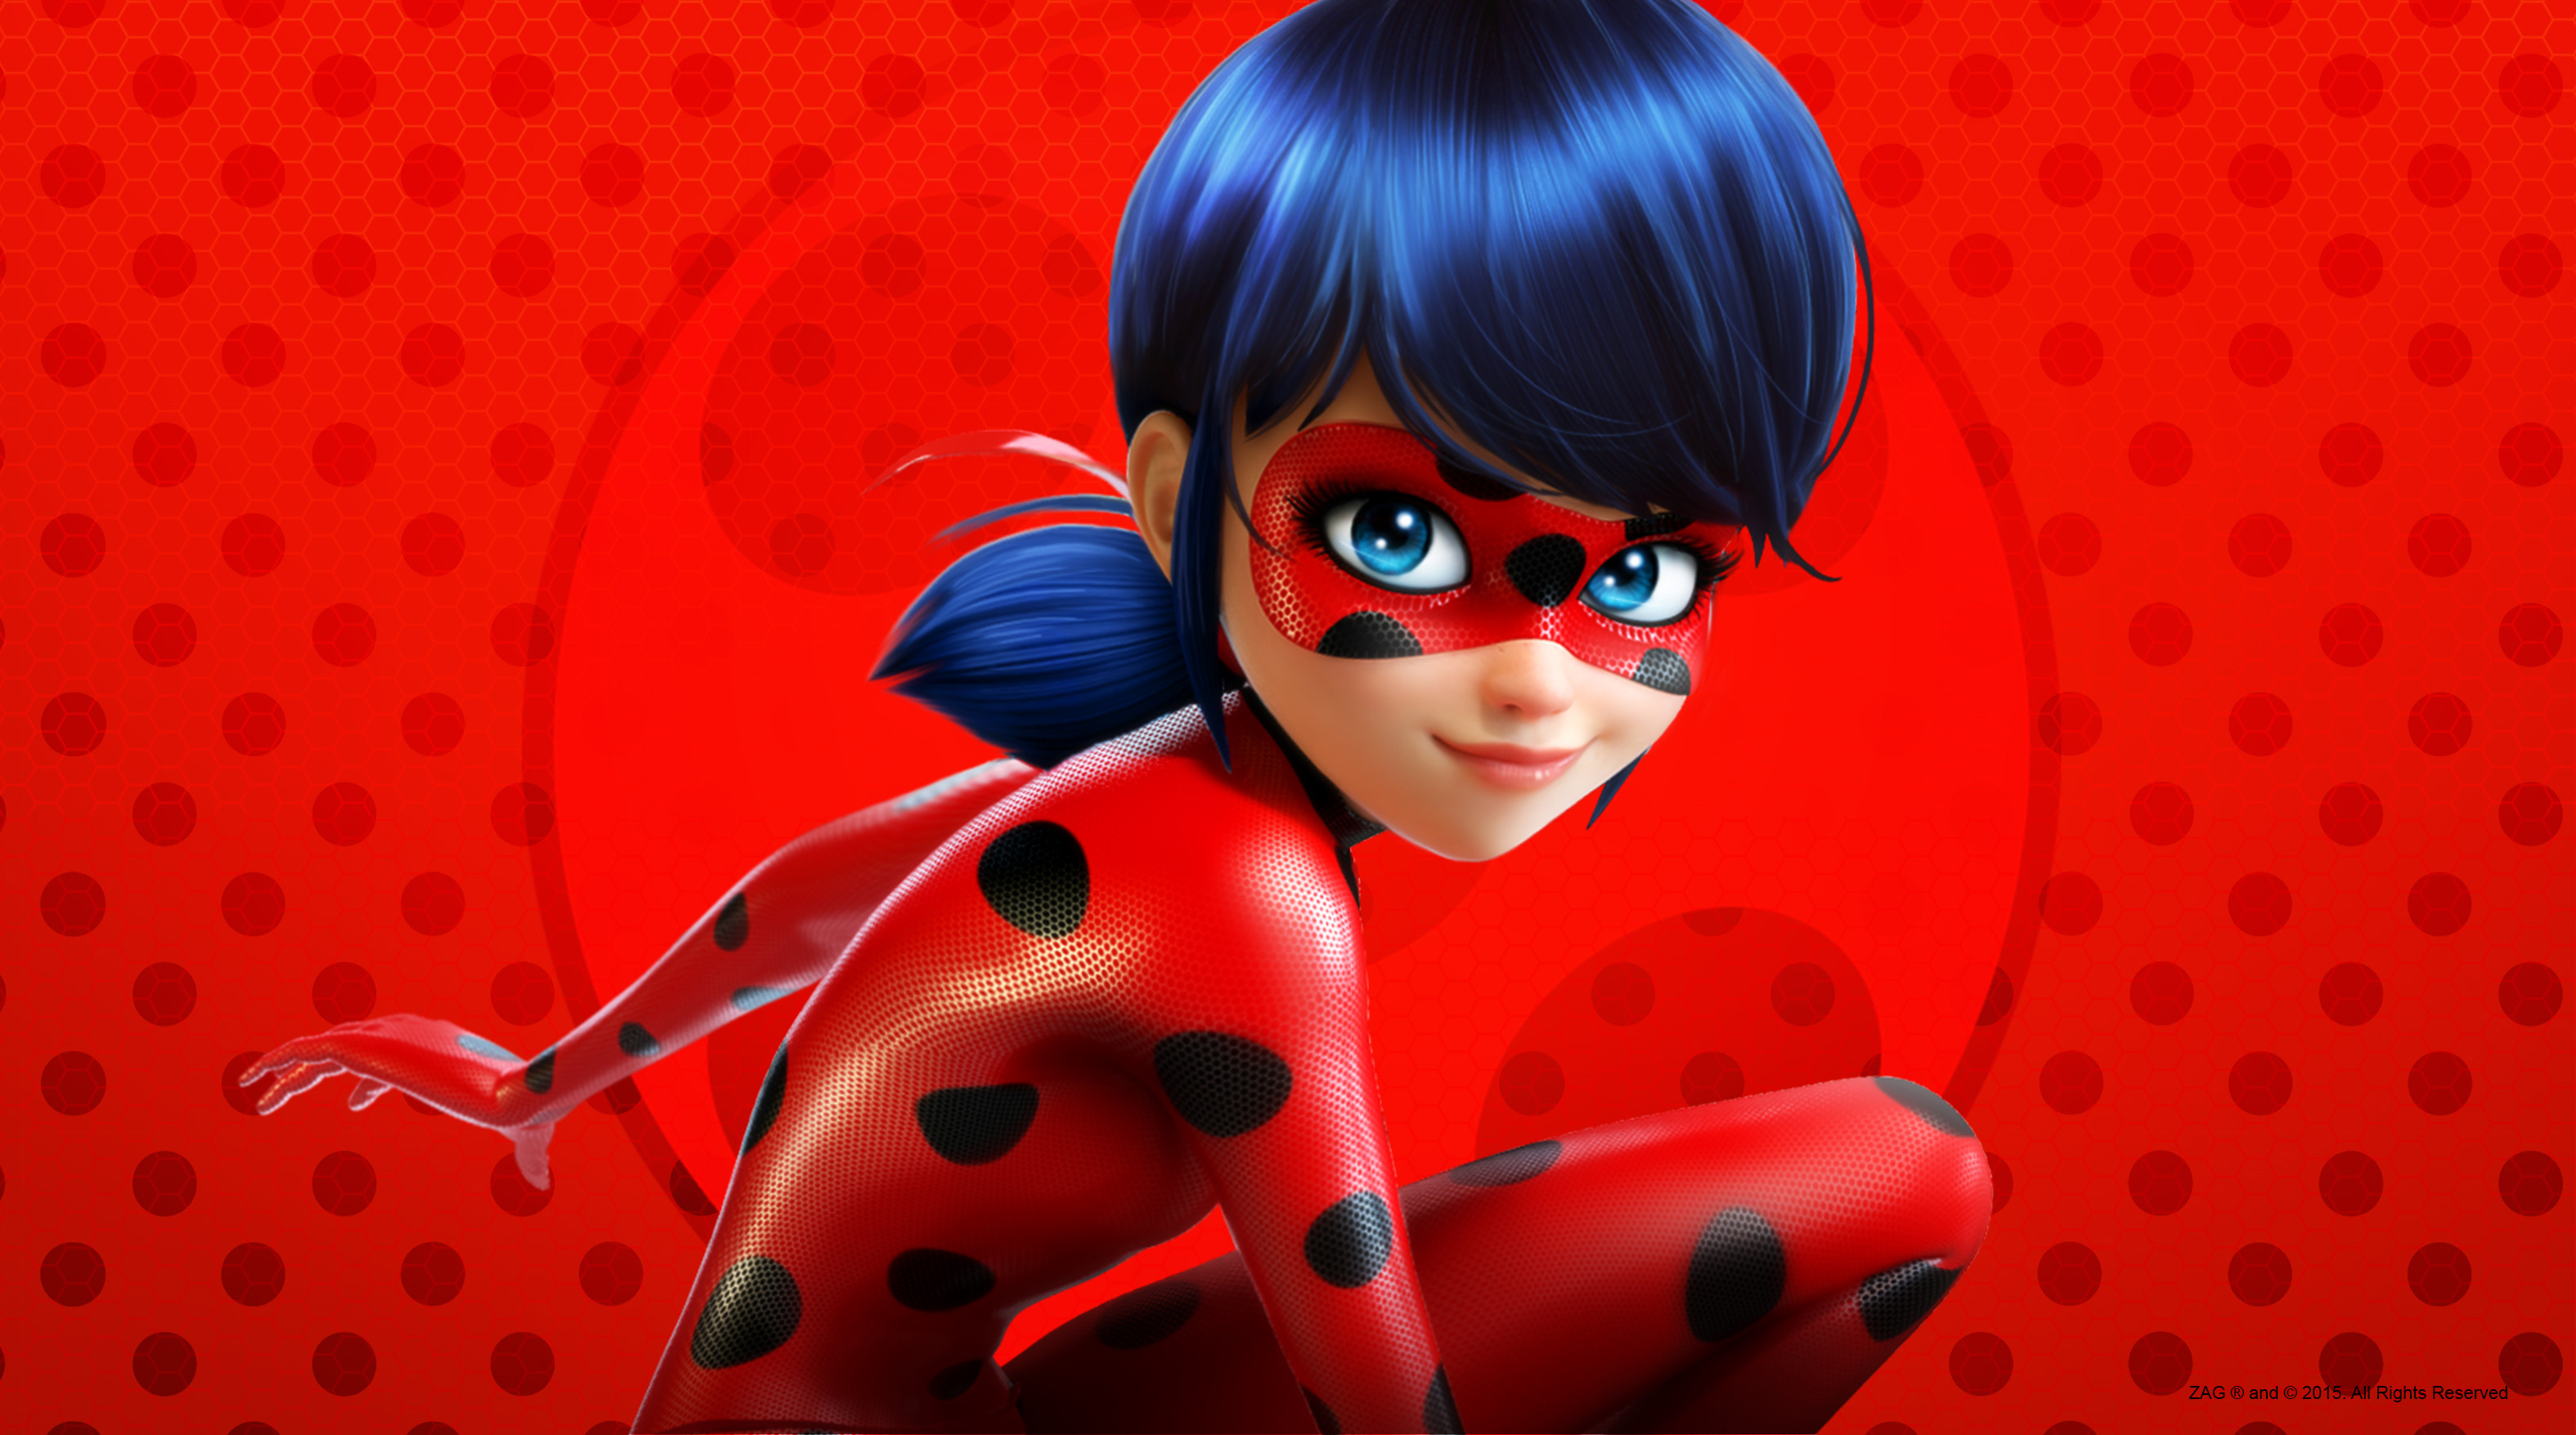 3150x1755 Zeichentrick - Miraculous: Tales of Ladybug & Cat Noir Ladybug (Miraculous  Ladybug) Wallpaper